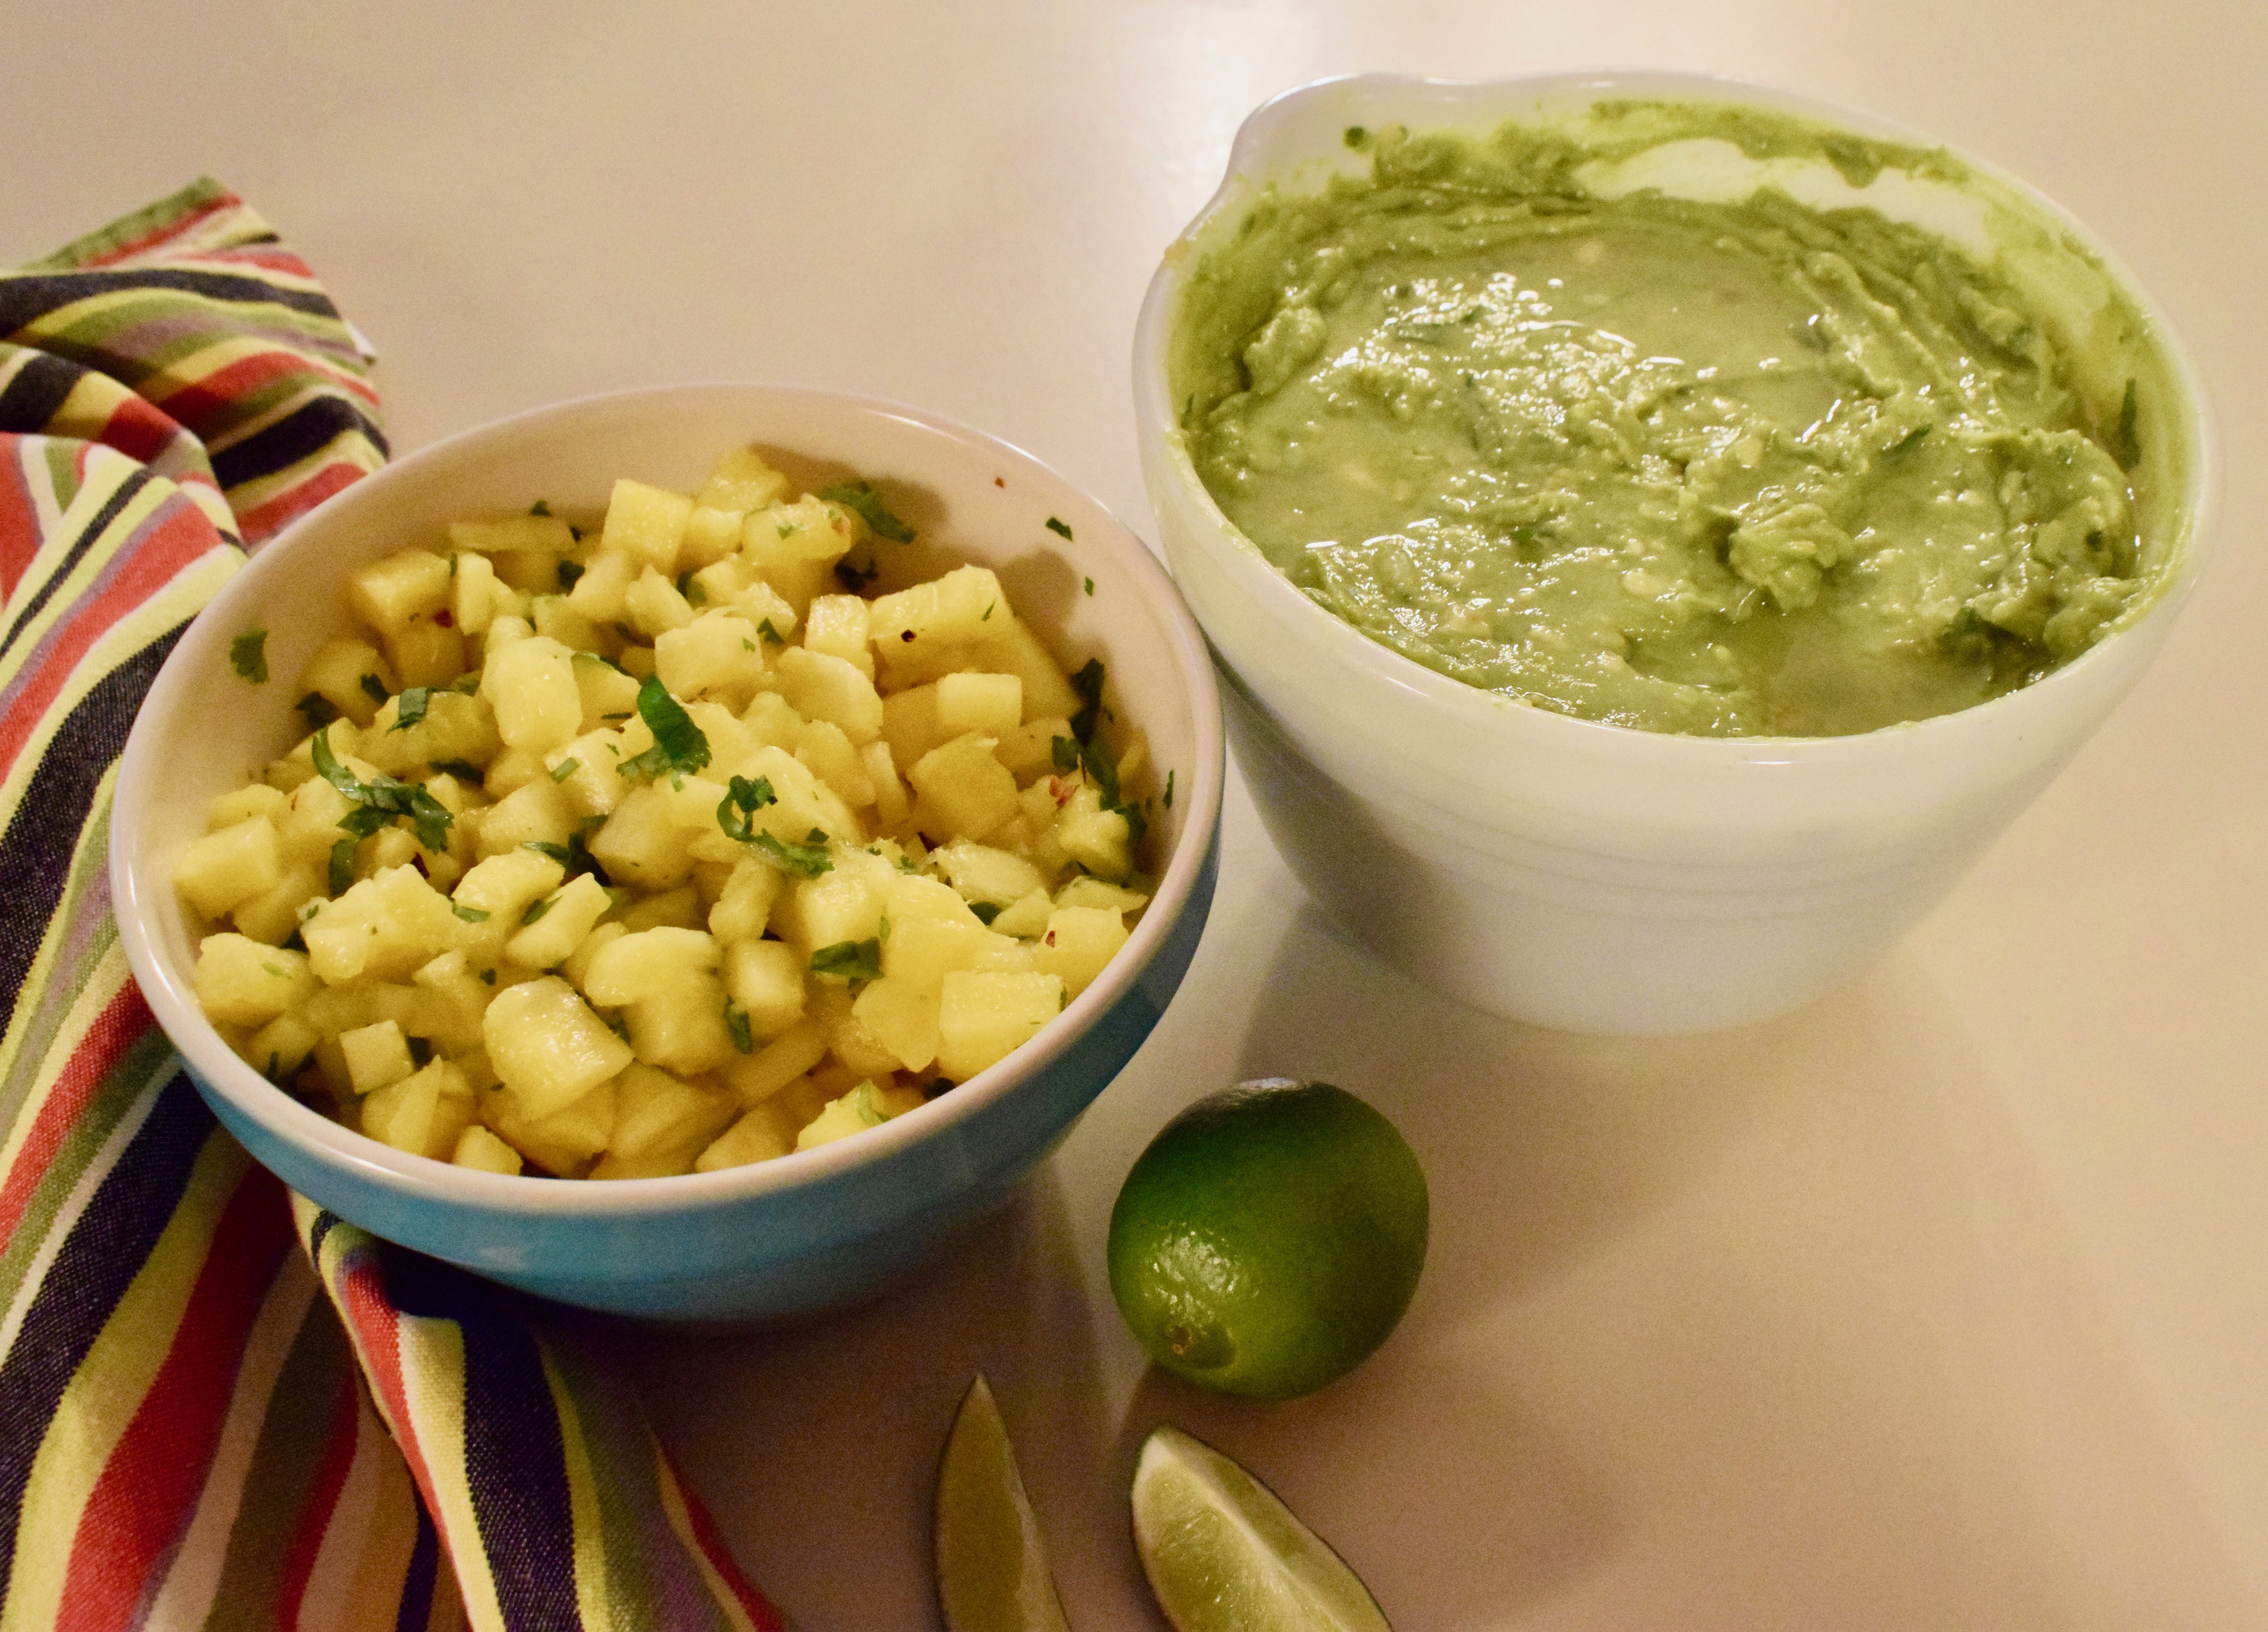 It's the Weekend, Number 101, Pineapple Salsa and Guacamole Ready to Serve